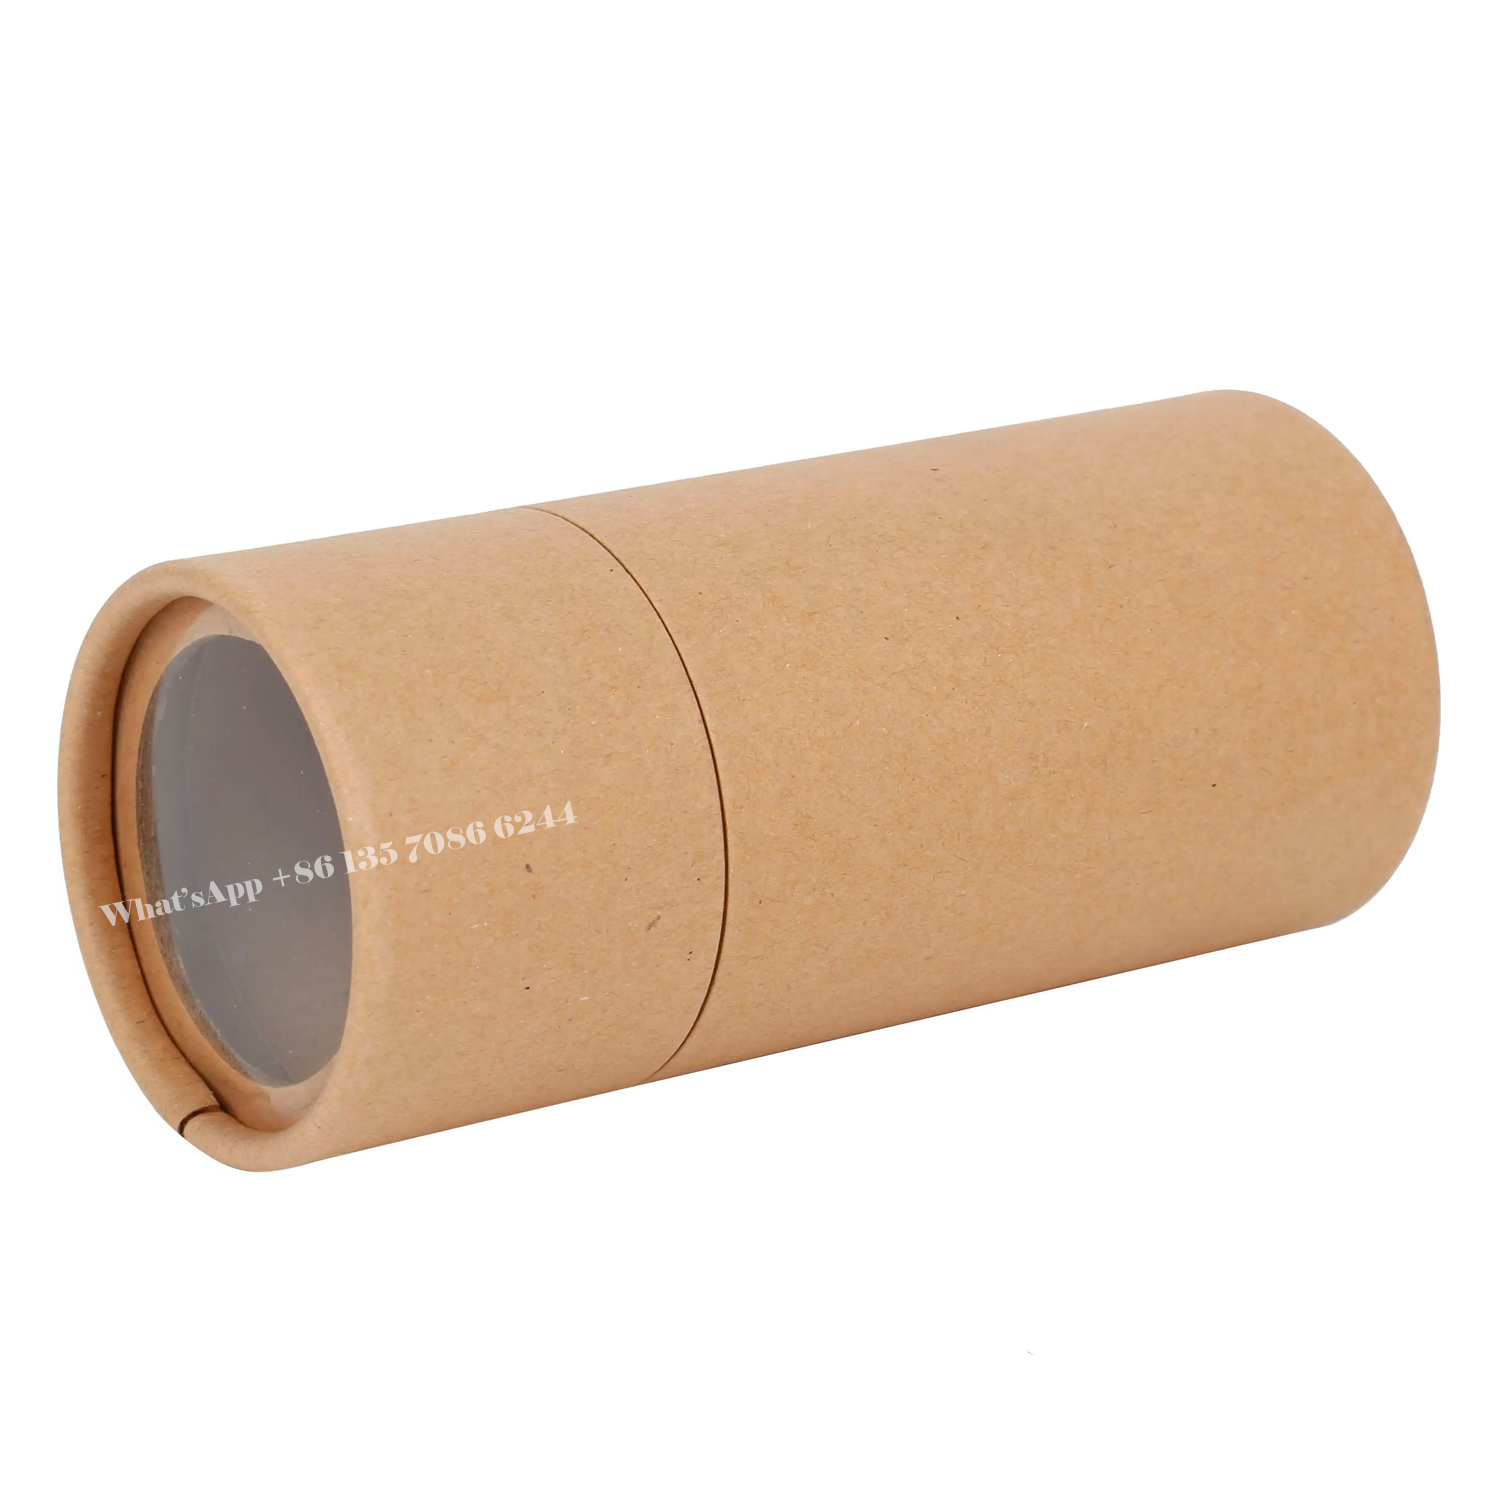 Crafted Kraft Paper Tube Box Packaging with Clear Window  